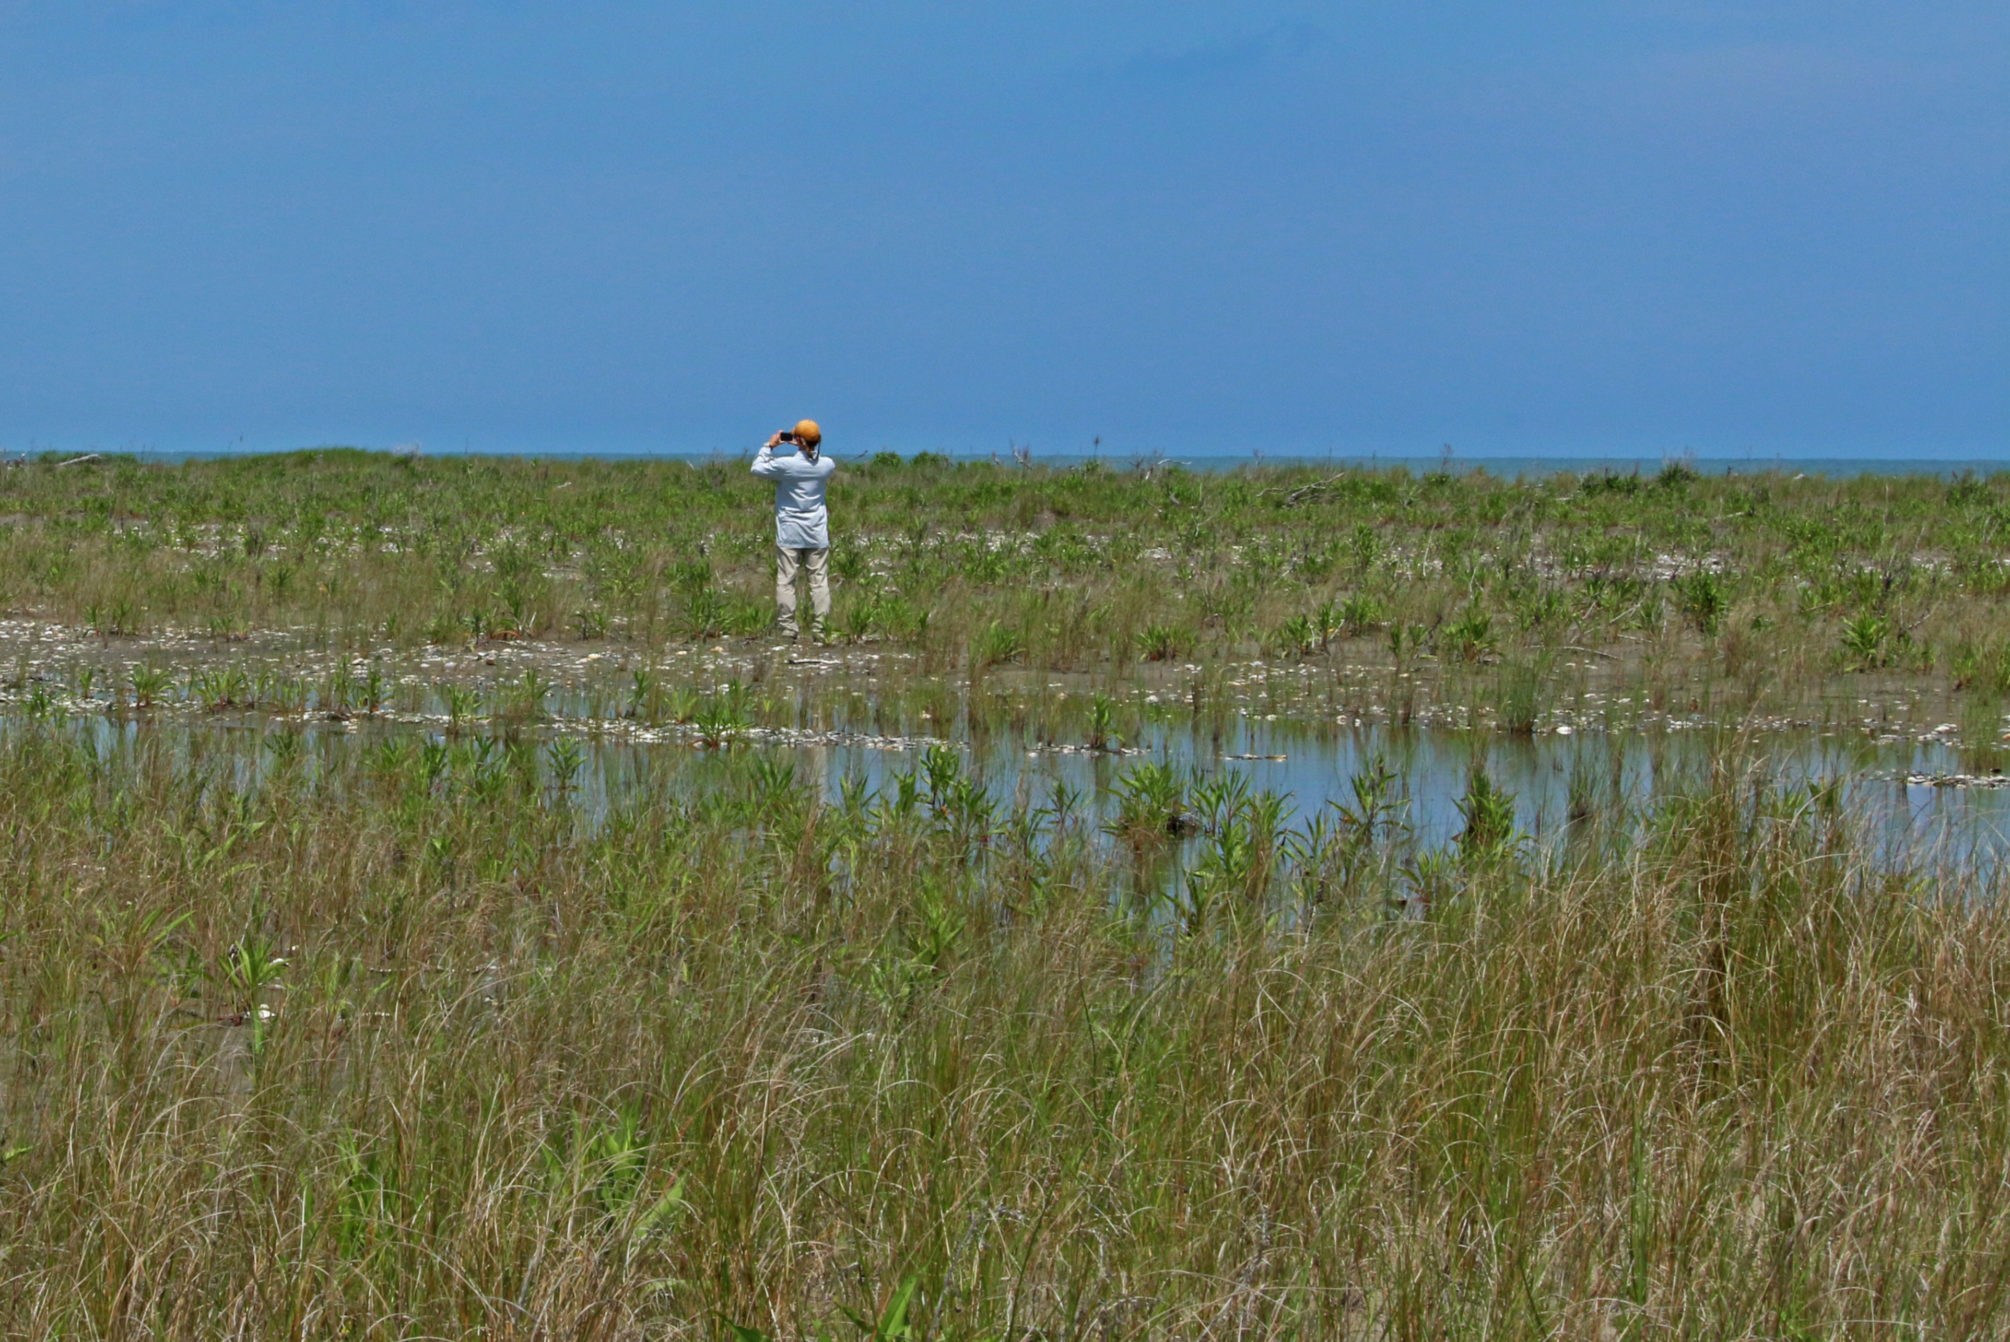 PhD researcher Joe Brown looking out over a barrier island in the Virginia Coast Reserve.